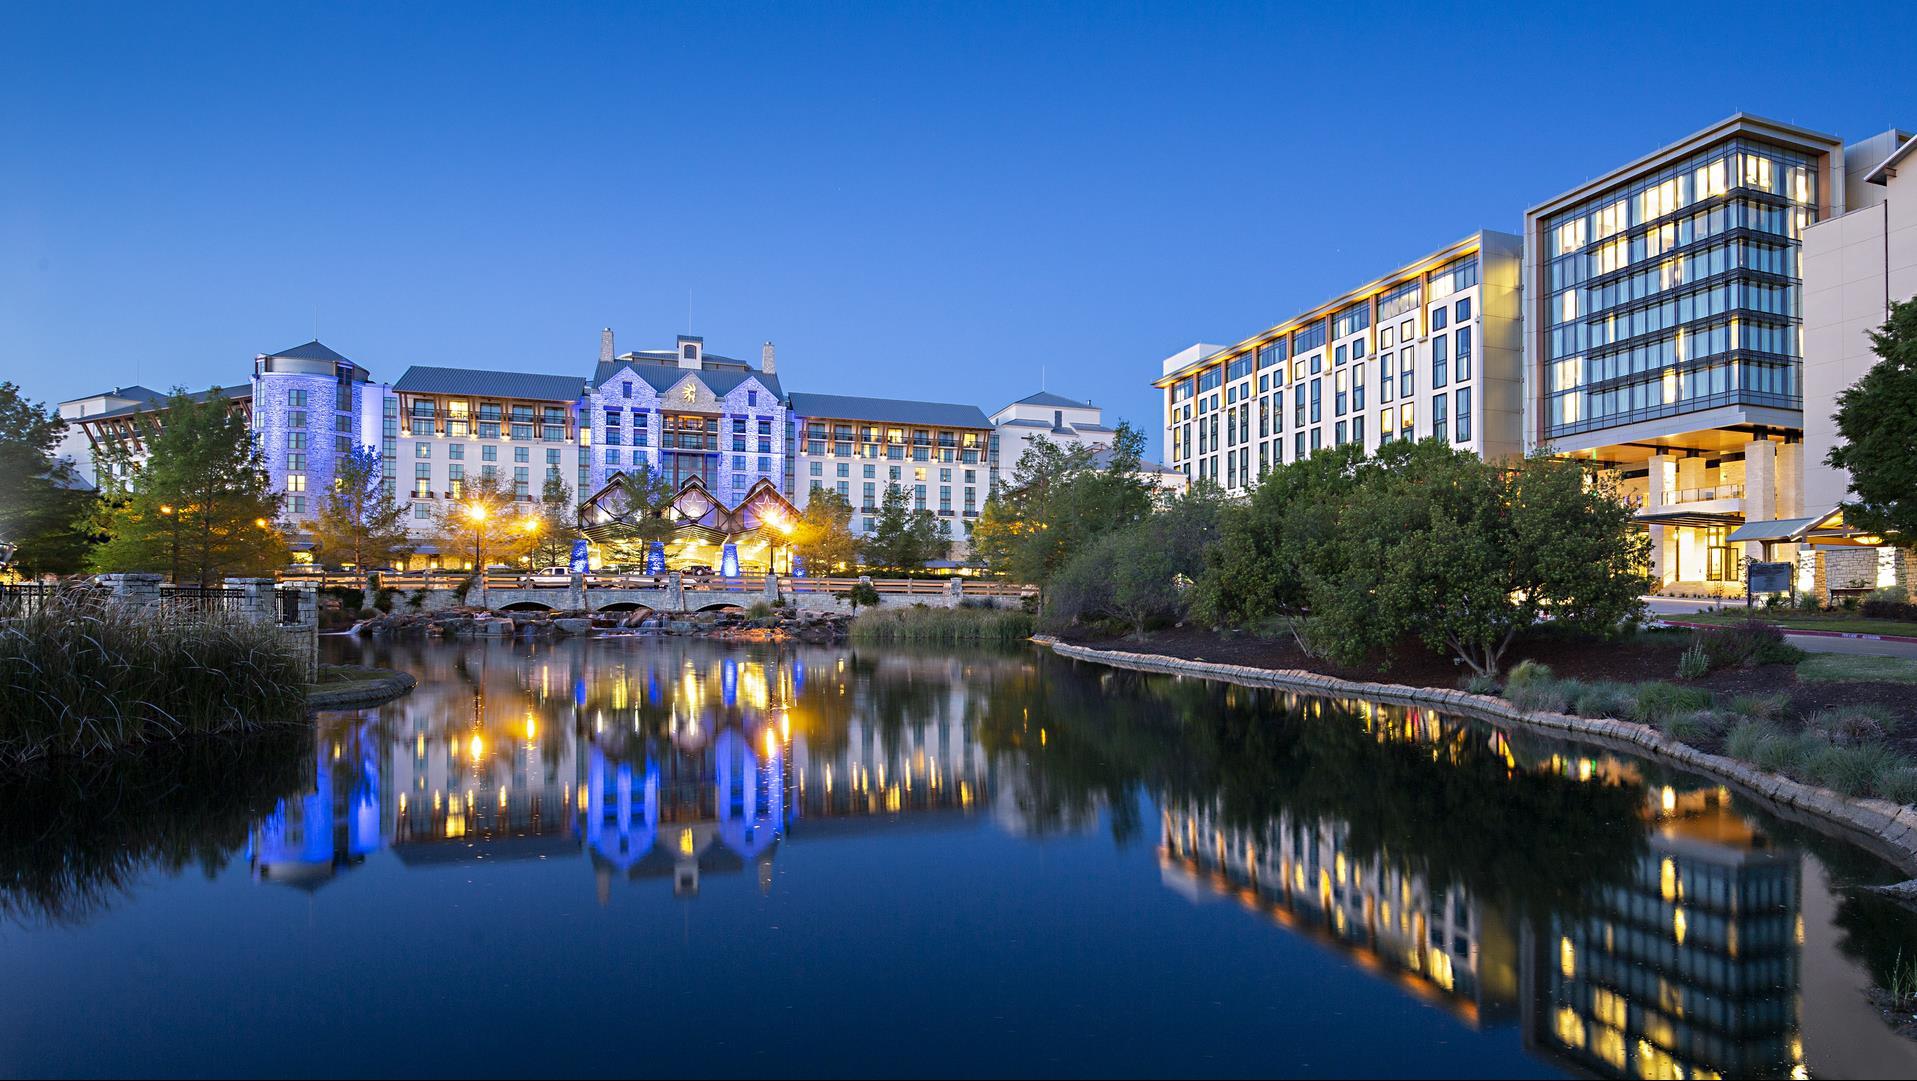 Gaylord Texan Resort & Convention Center in Grapevine, TX